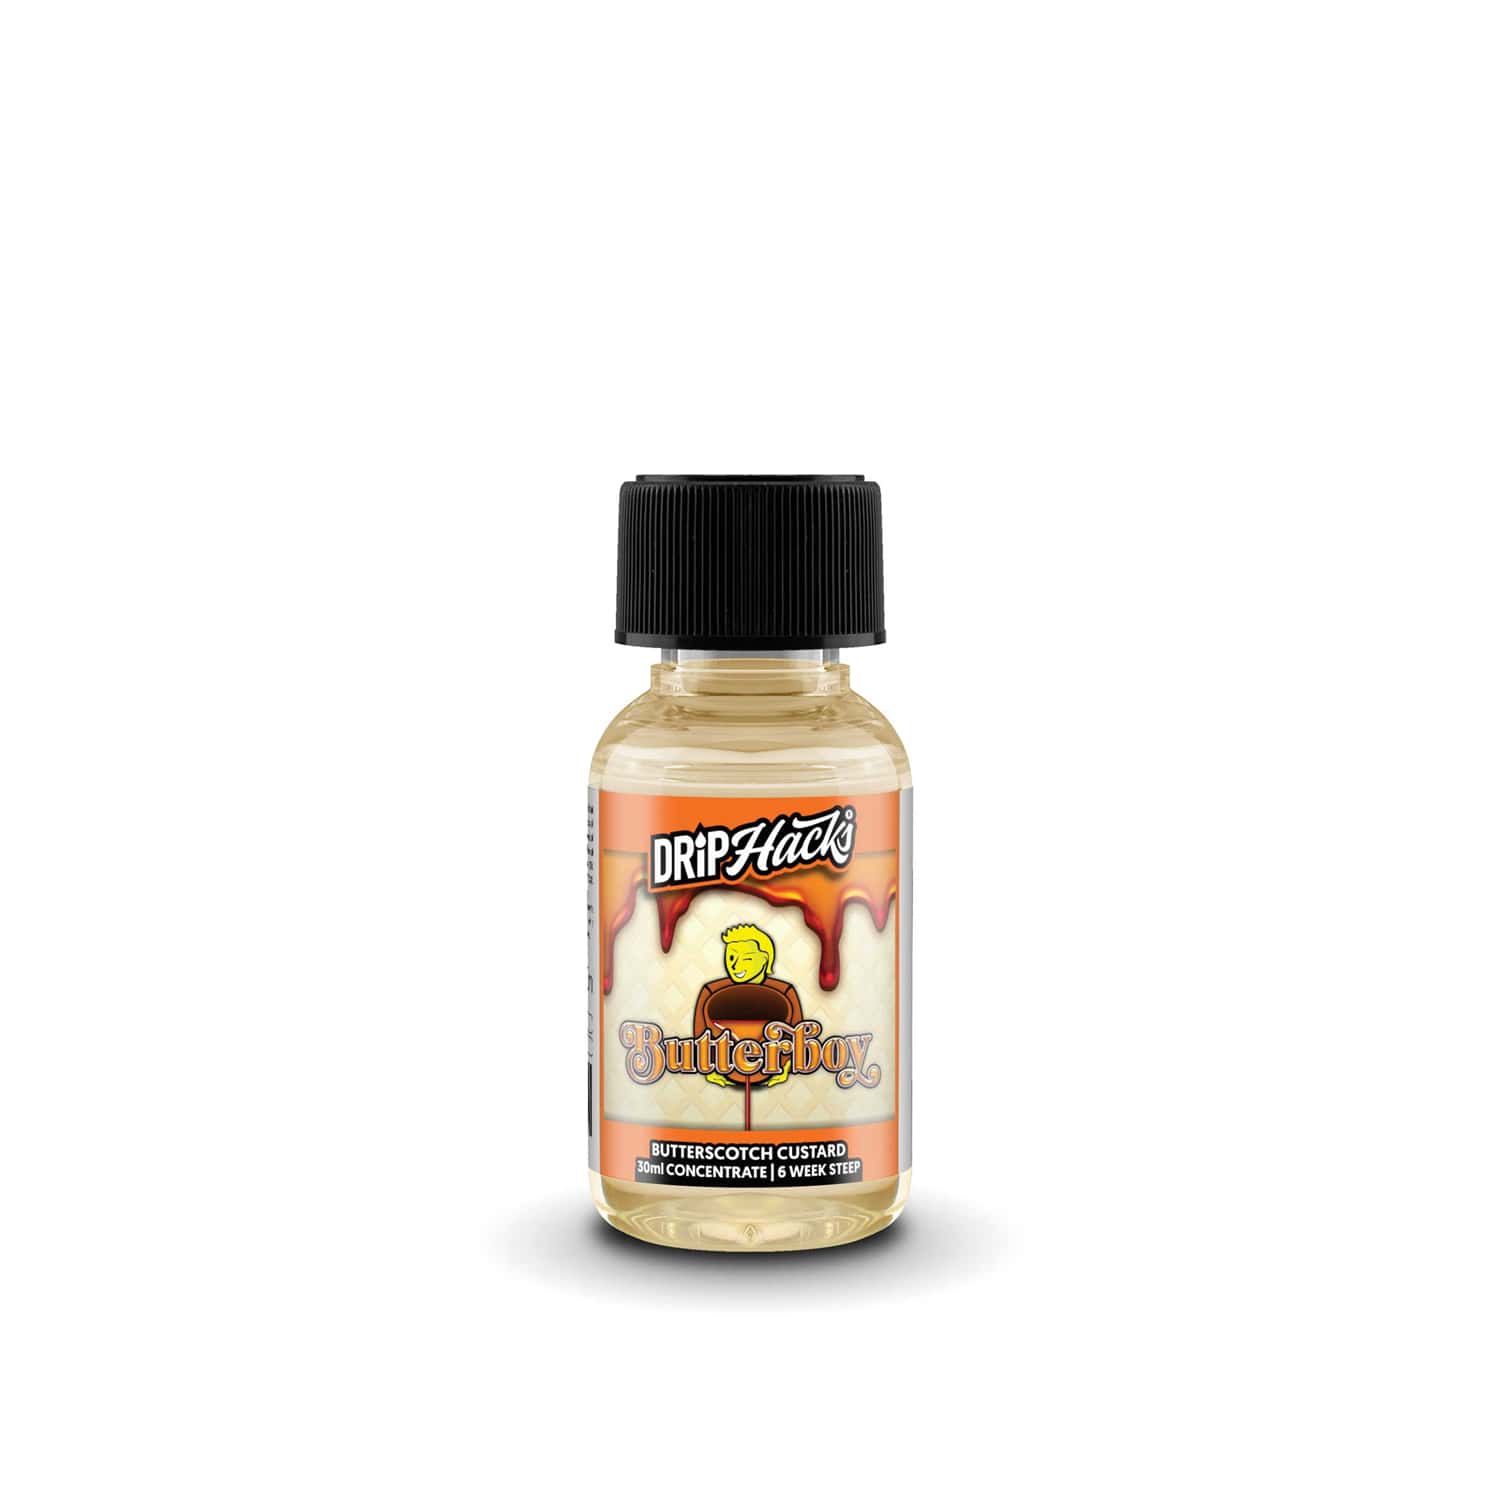 Butter Boy Flavour Concentrate by Drip Hacks